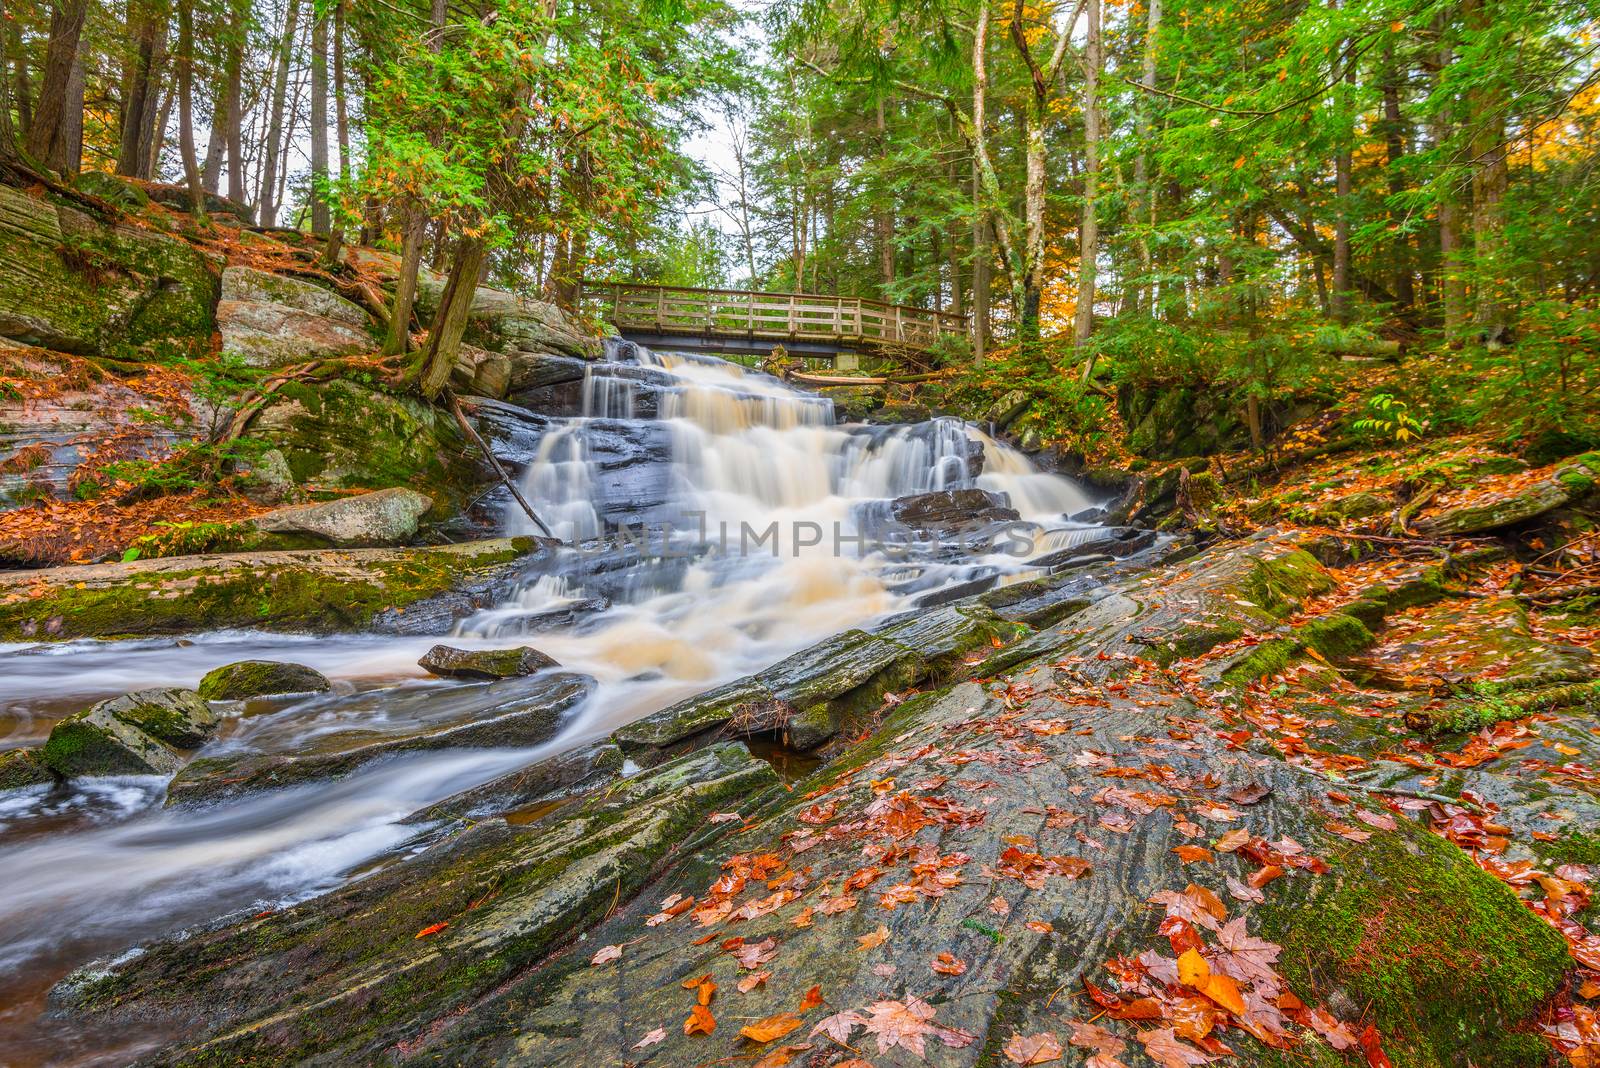 Potts Falls are located near the town of Bracebridge Ontario in the District of Muskoka.